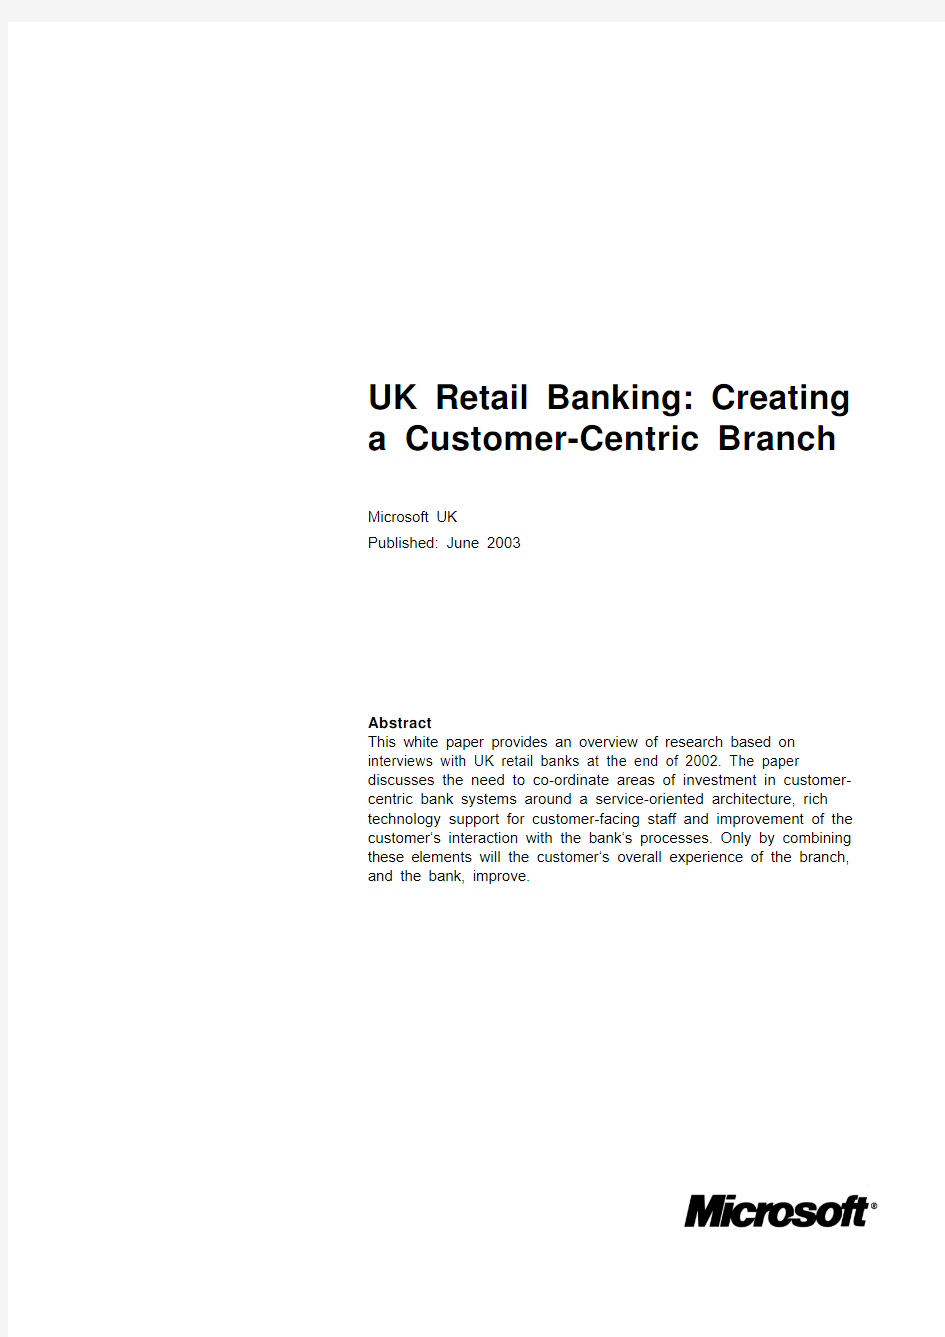 UK Retail Banking Creating a Customer-Centric Branch MS_RetailBank_WP_oddpages